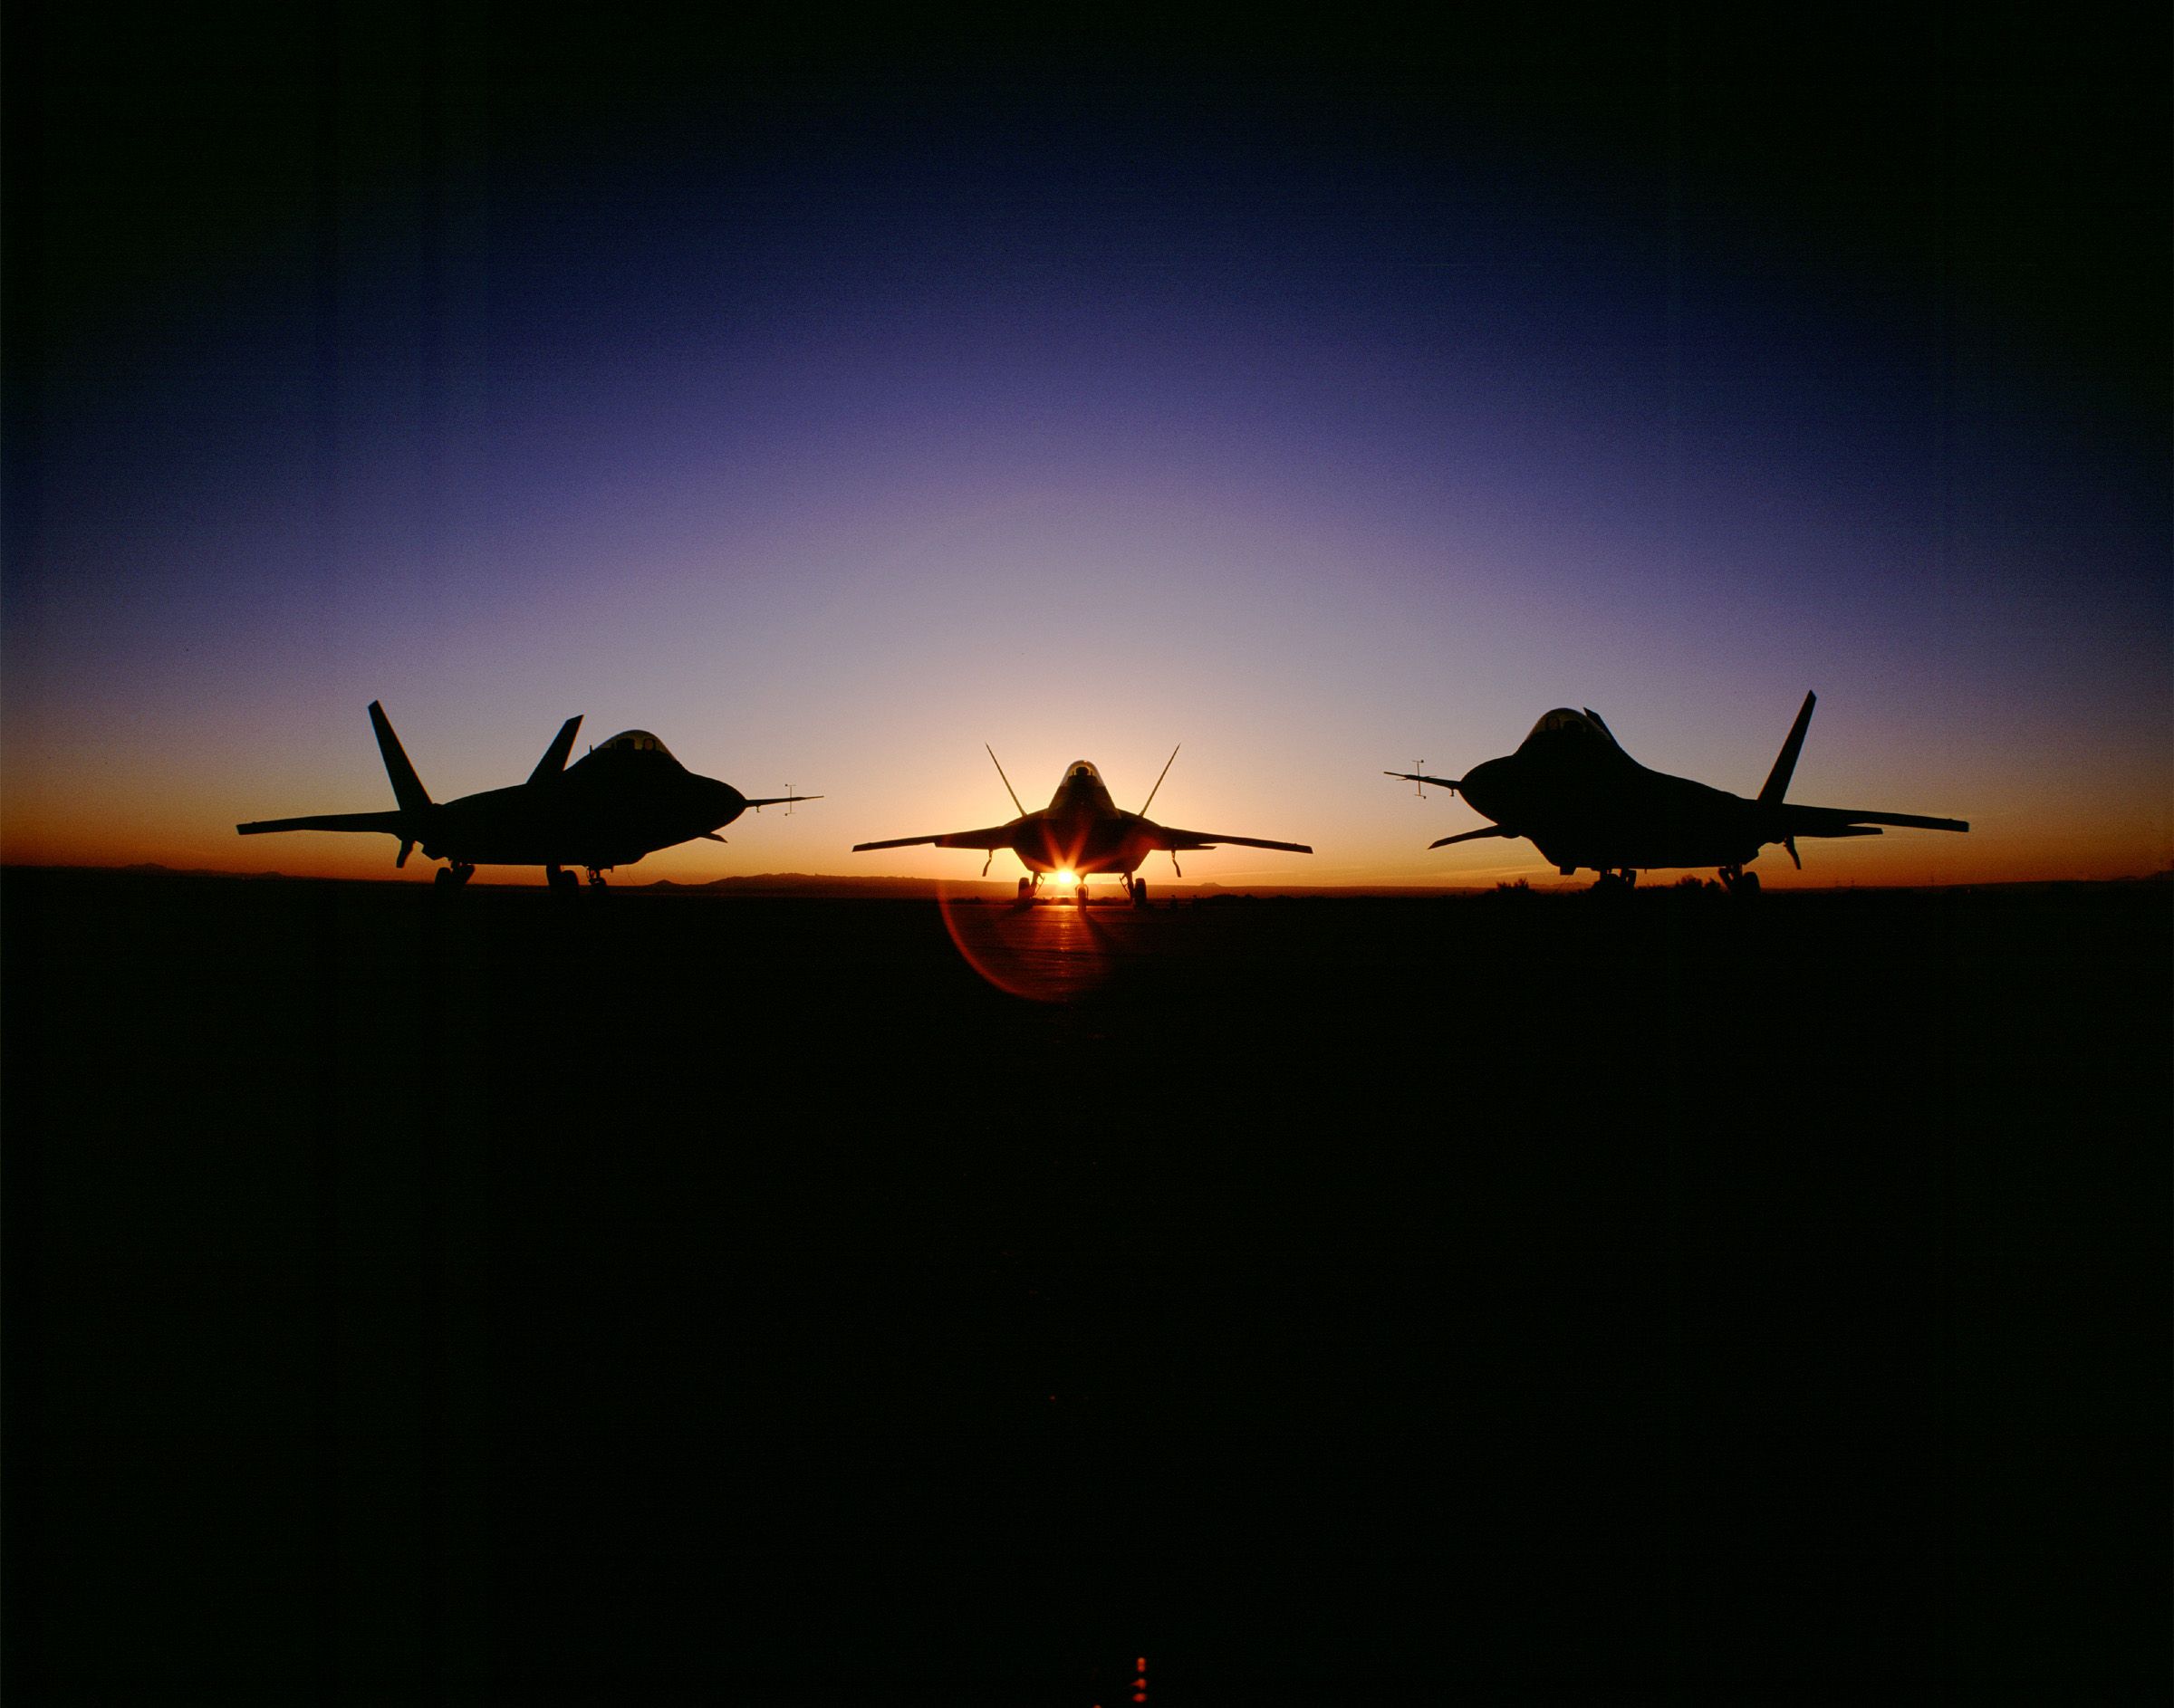 United States Air Force Wallpapers